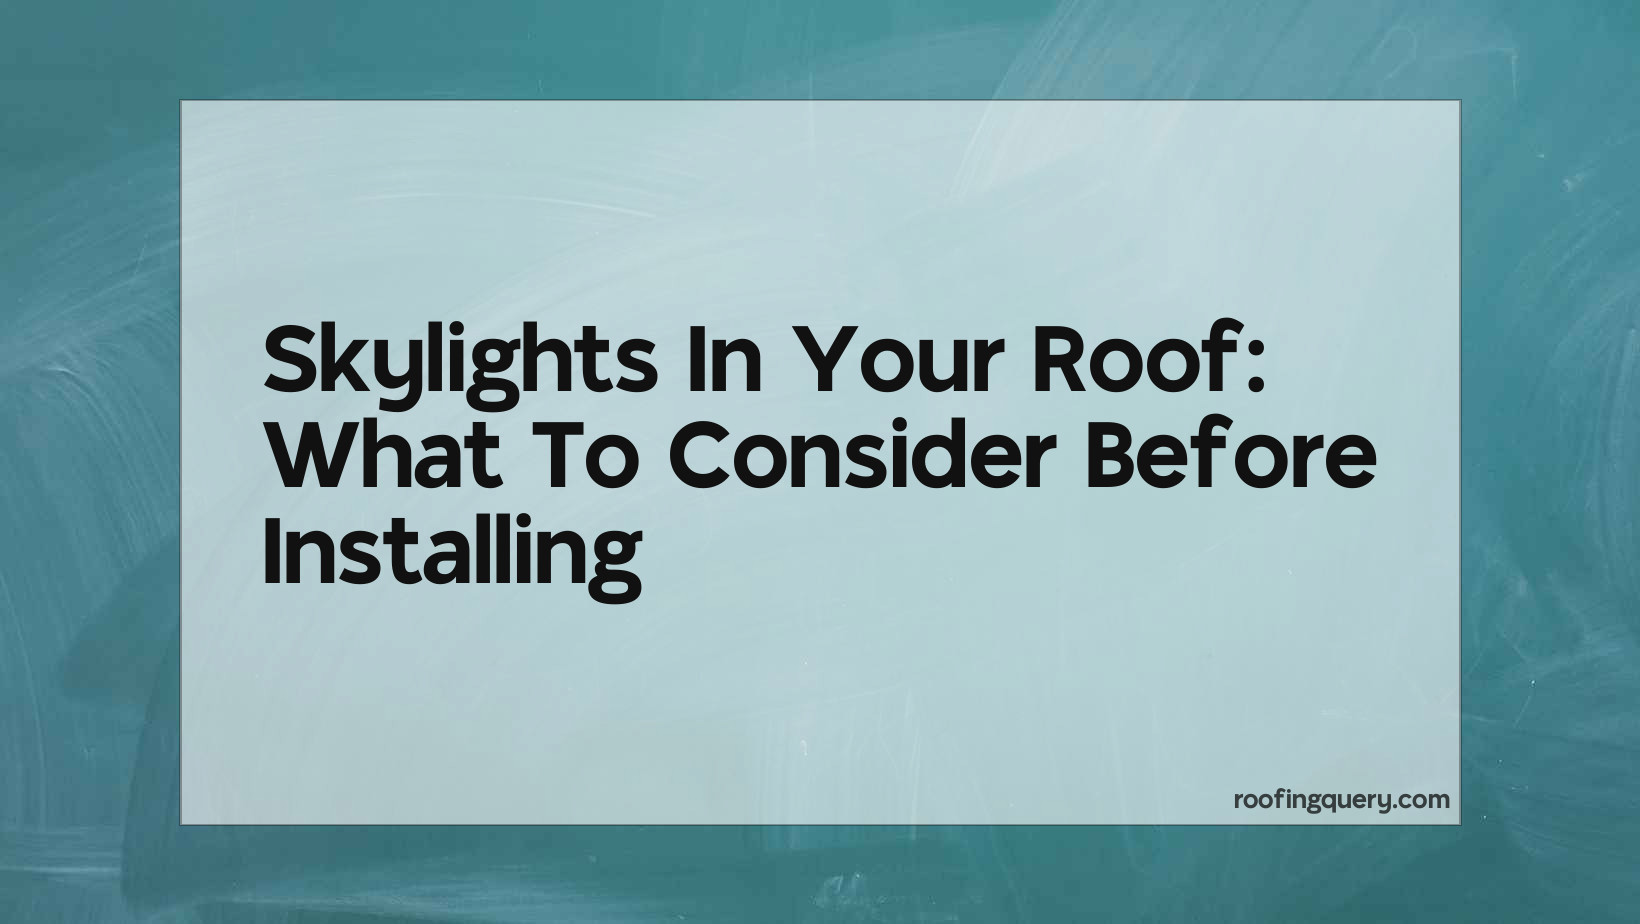 Skylights In Your Roof: What To Consider Before Installing